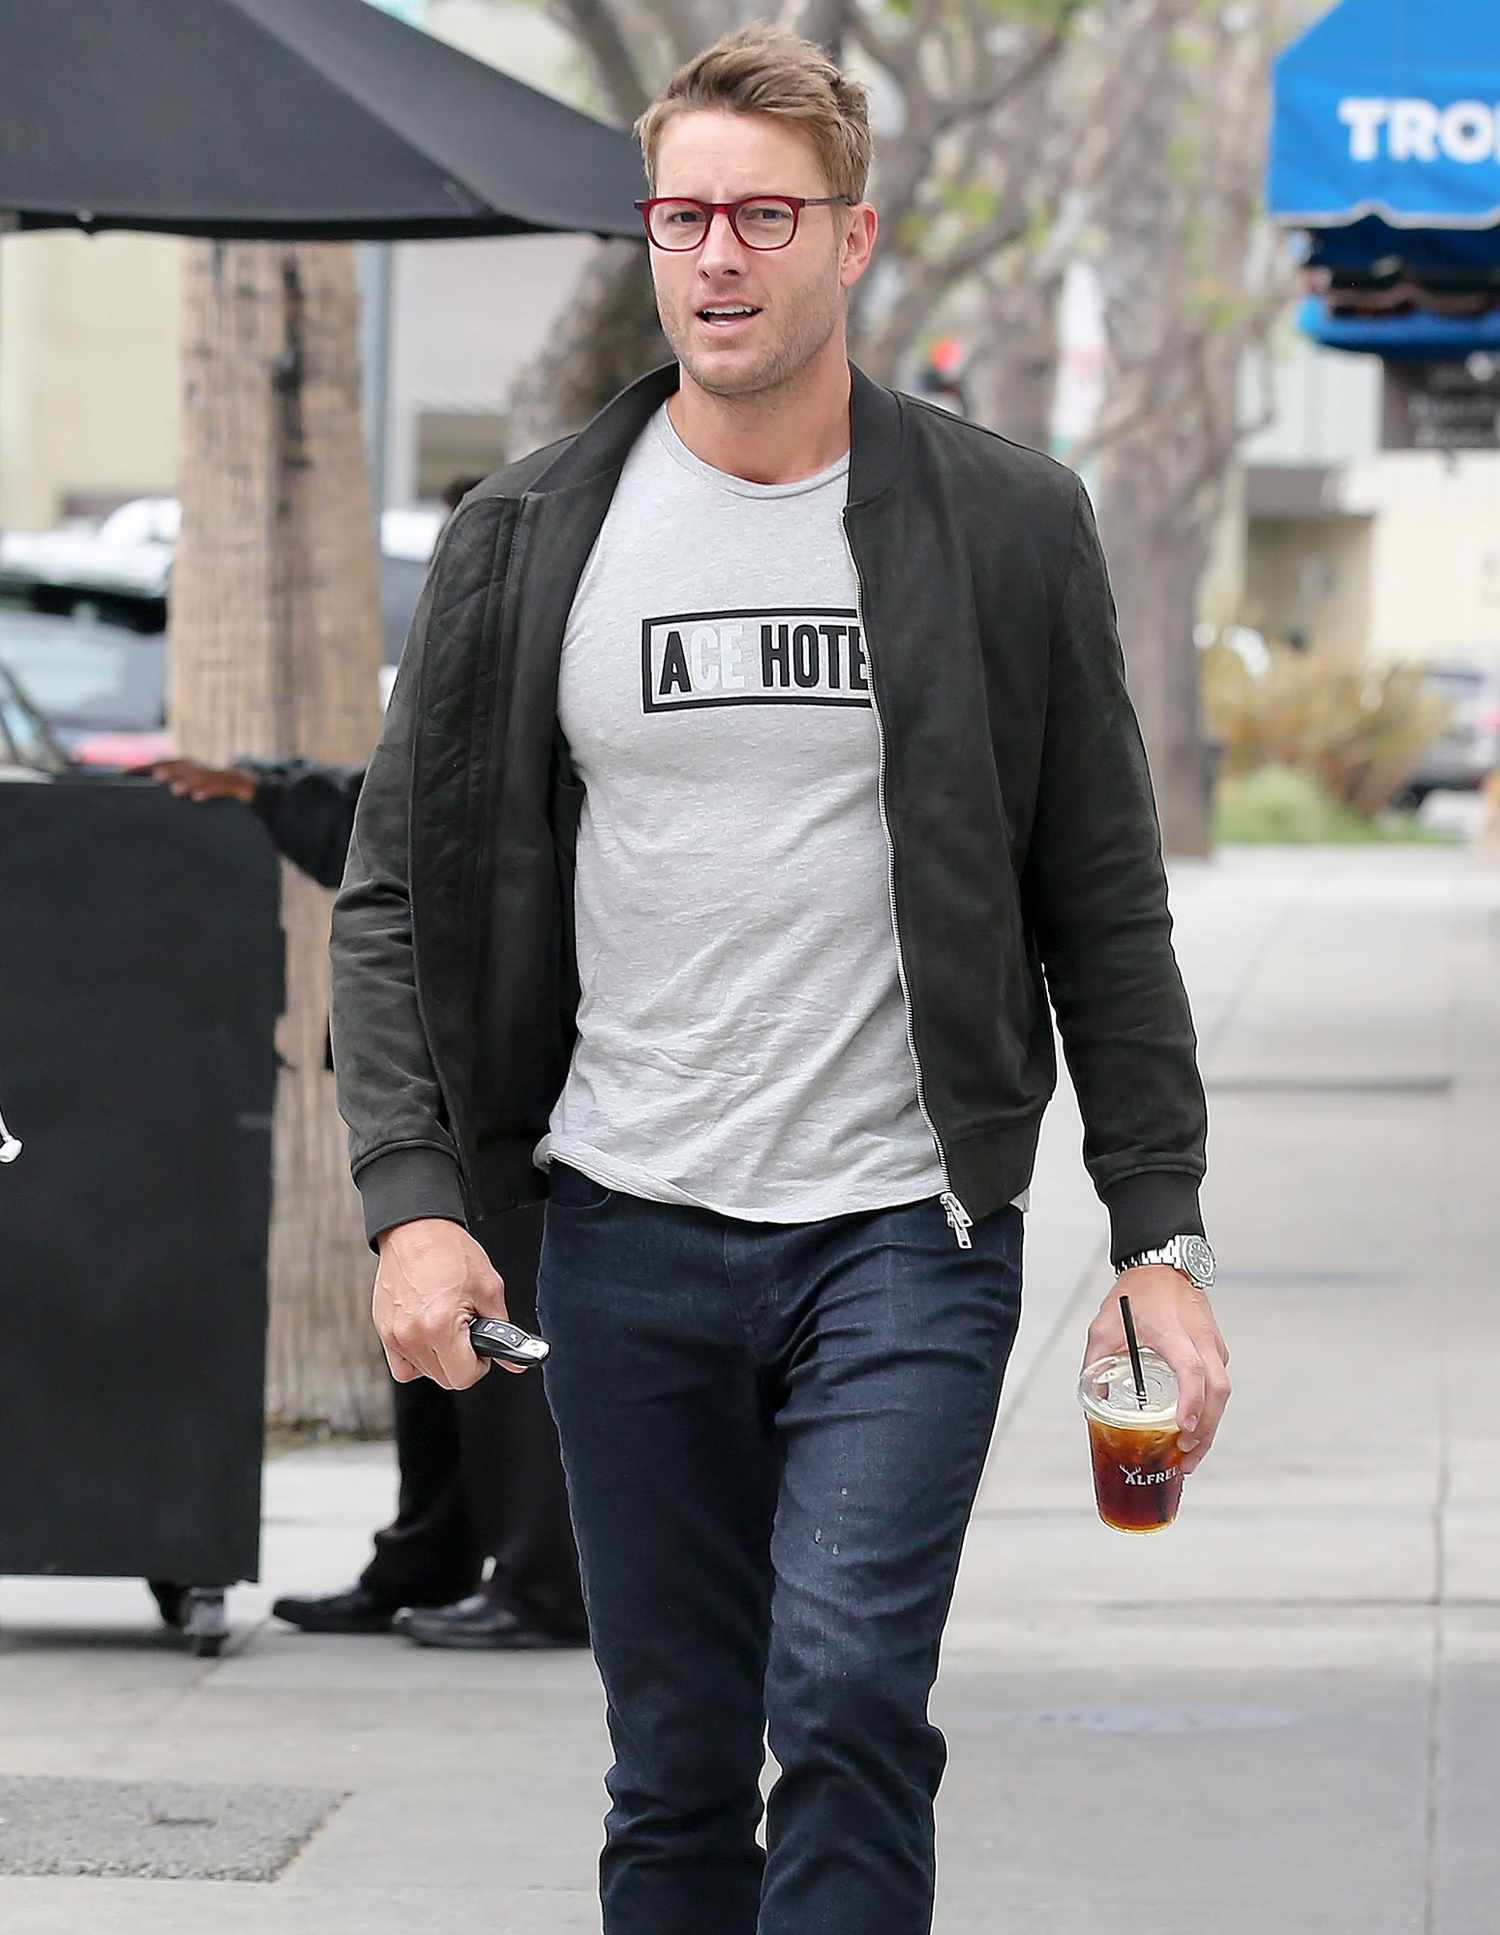 "This Is us" actor Justin Hartley grabs a coffee in Los Angeles, California